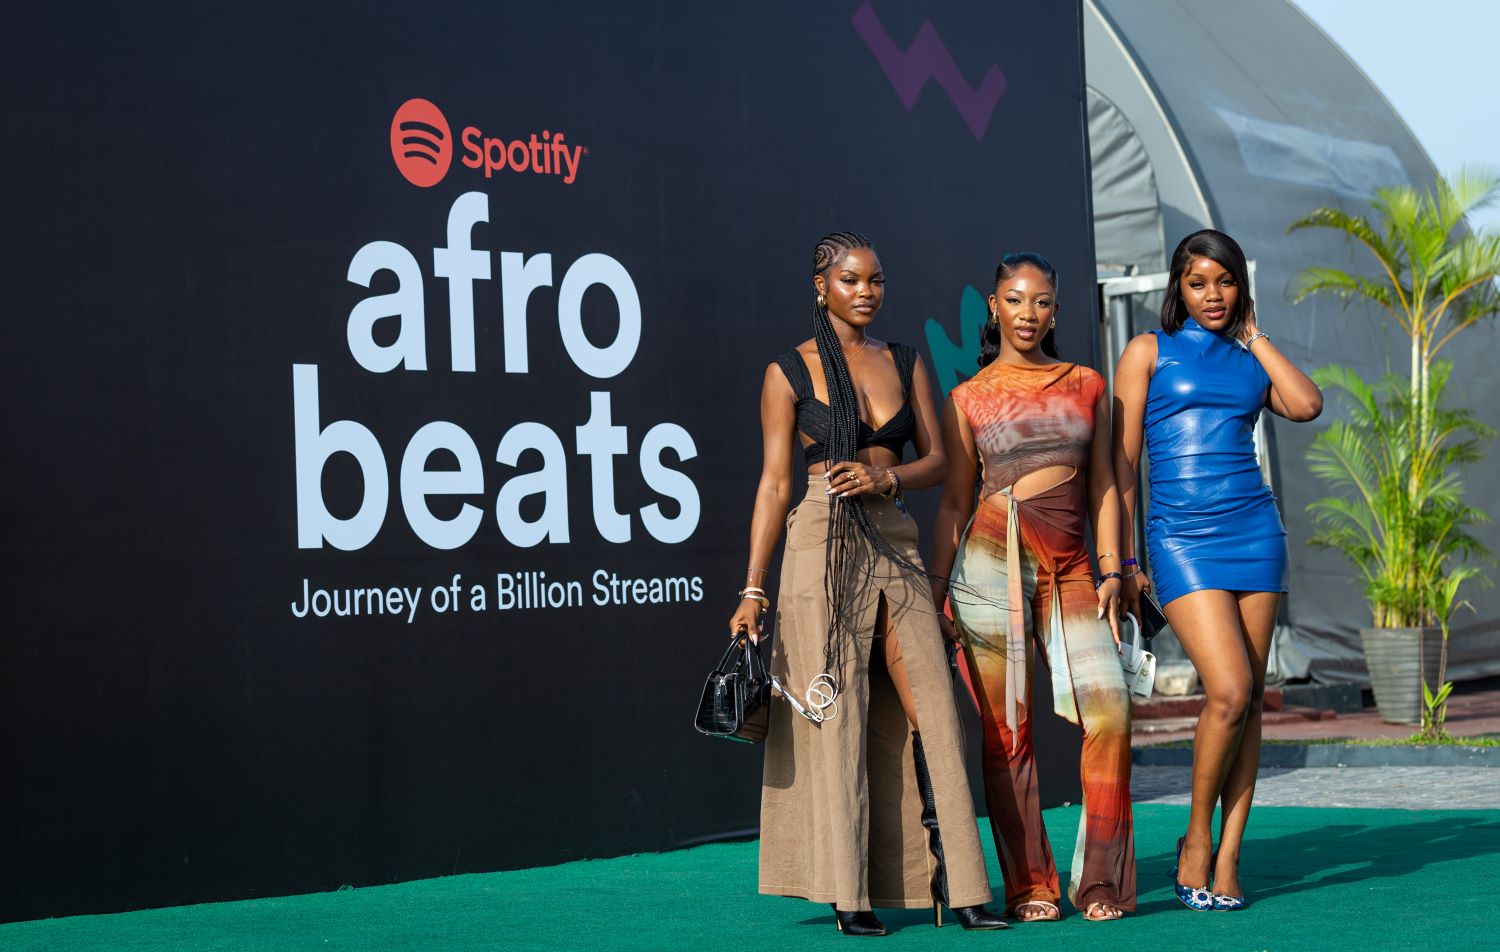 Spotify's Afrobeats Celebration: Where Music Meets the Hearts of Influencers, Media, and Music Fans